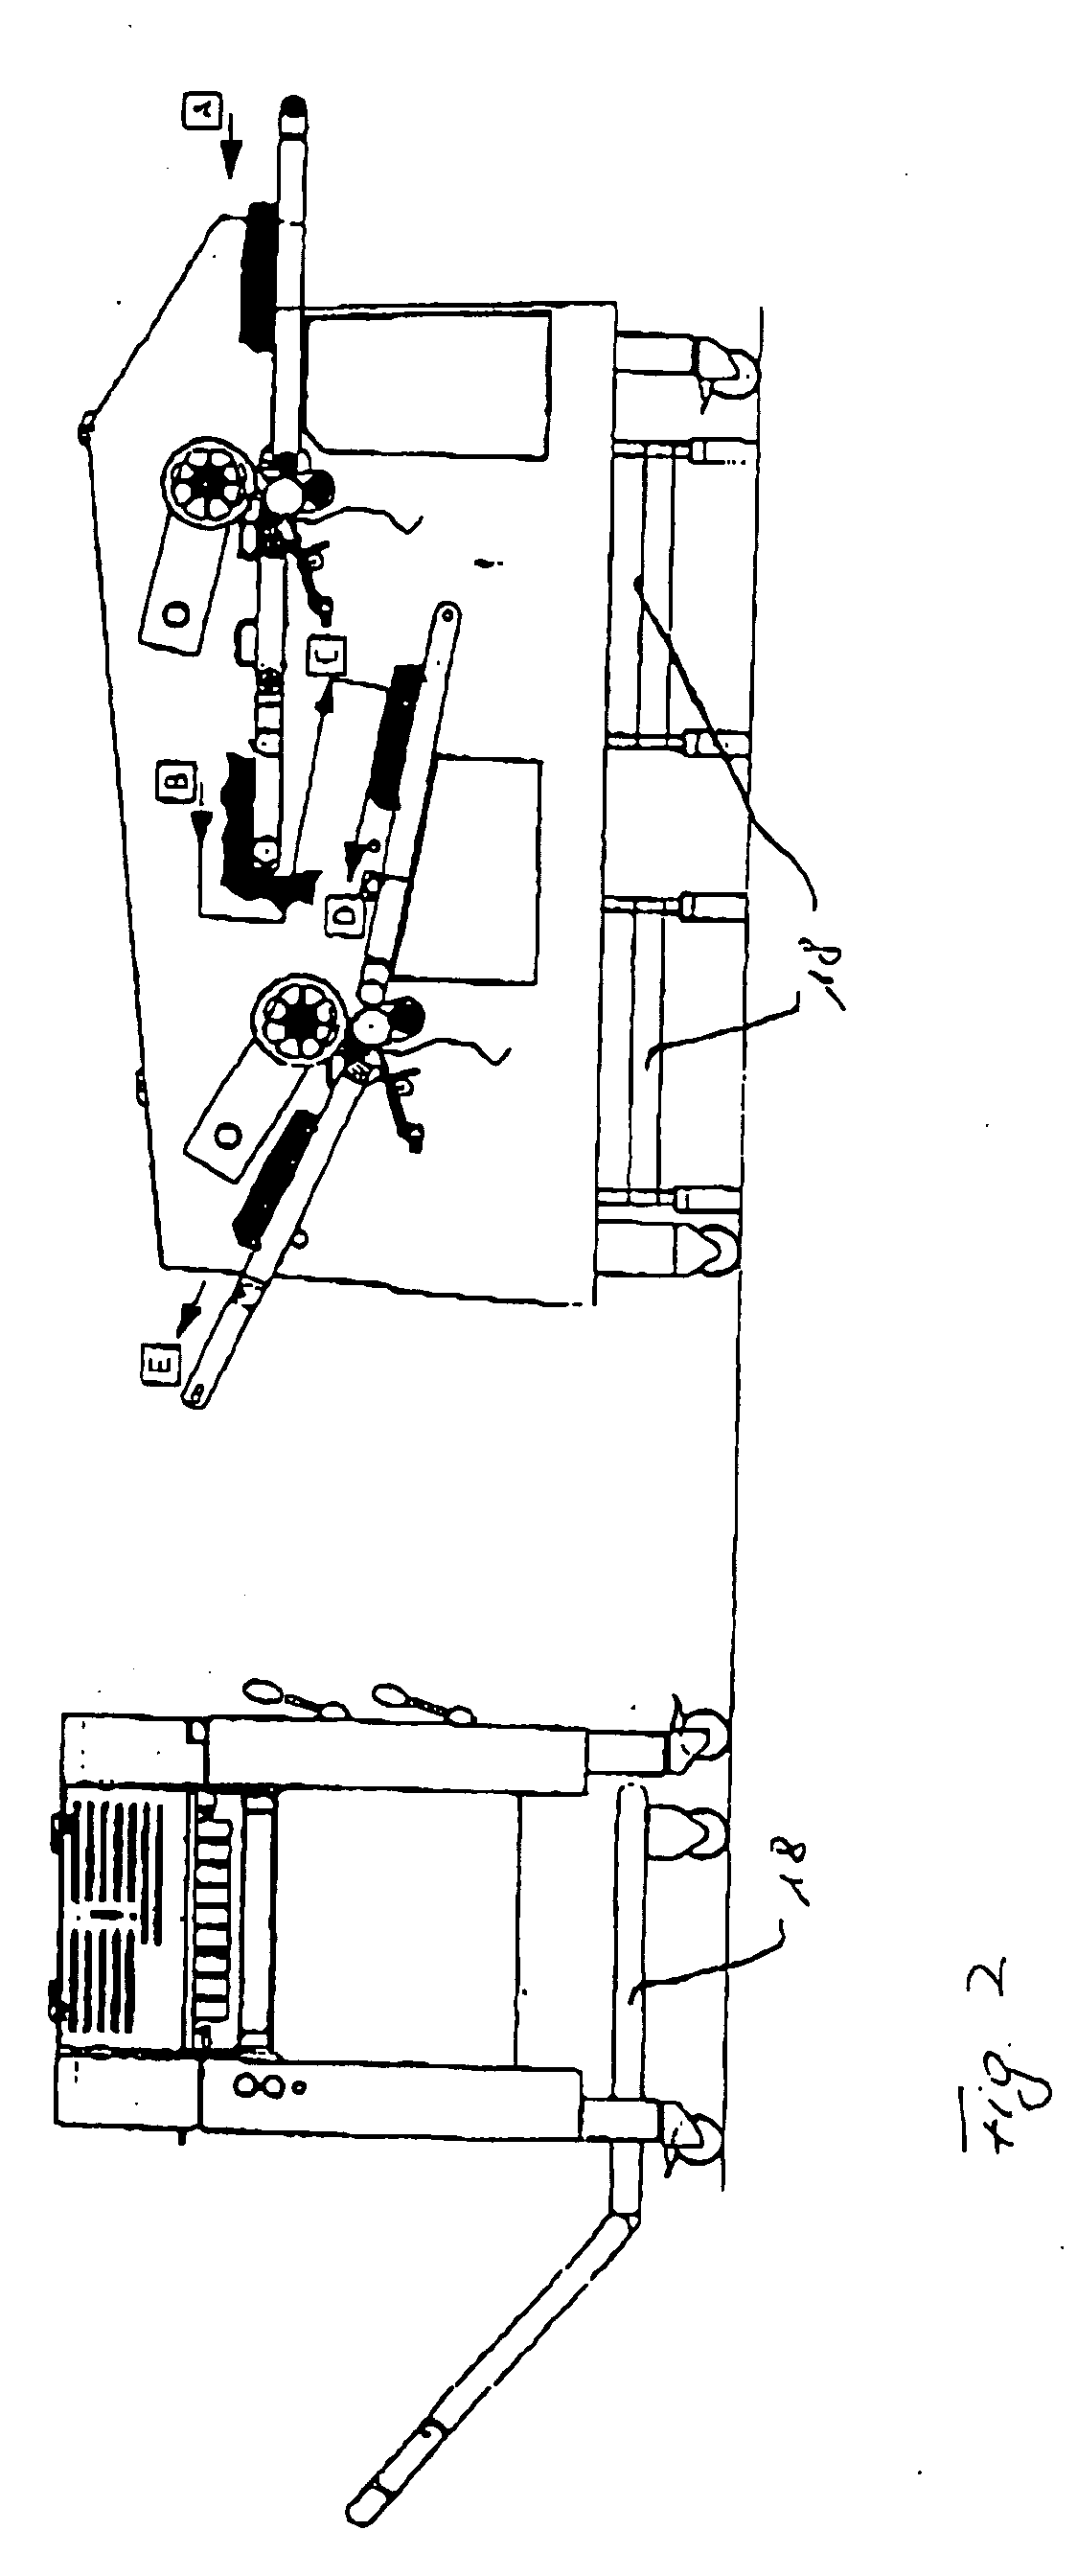 Device for de-rinding and skinning a product to be treated